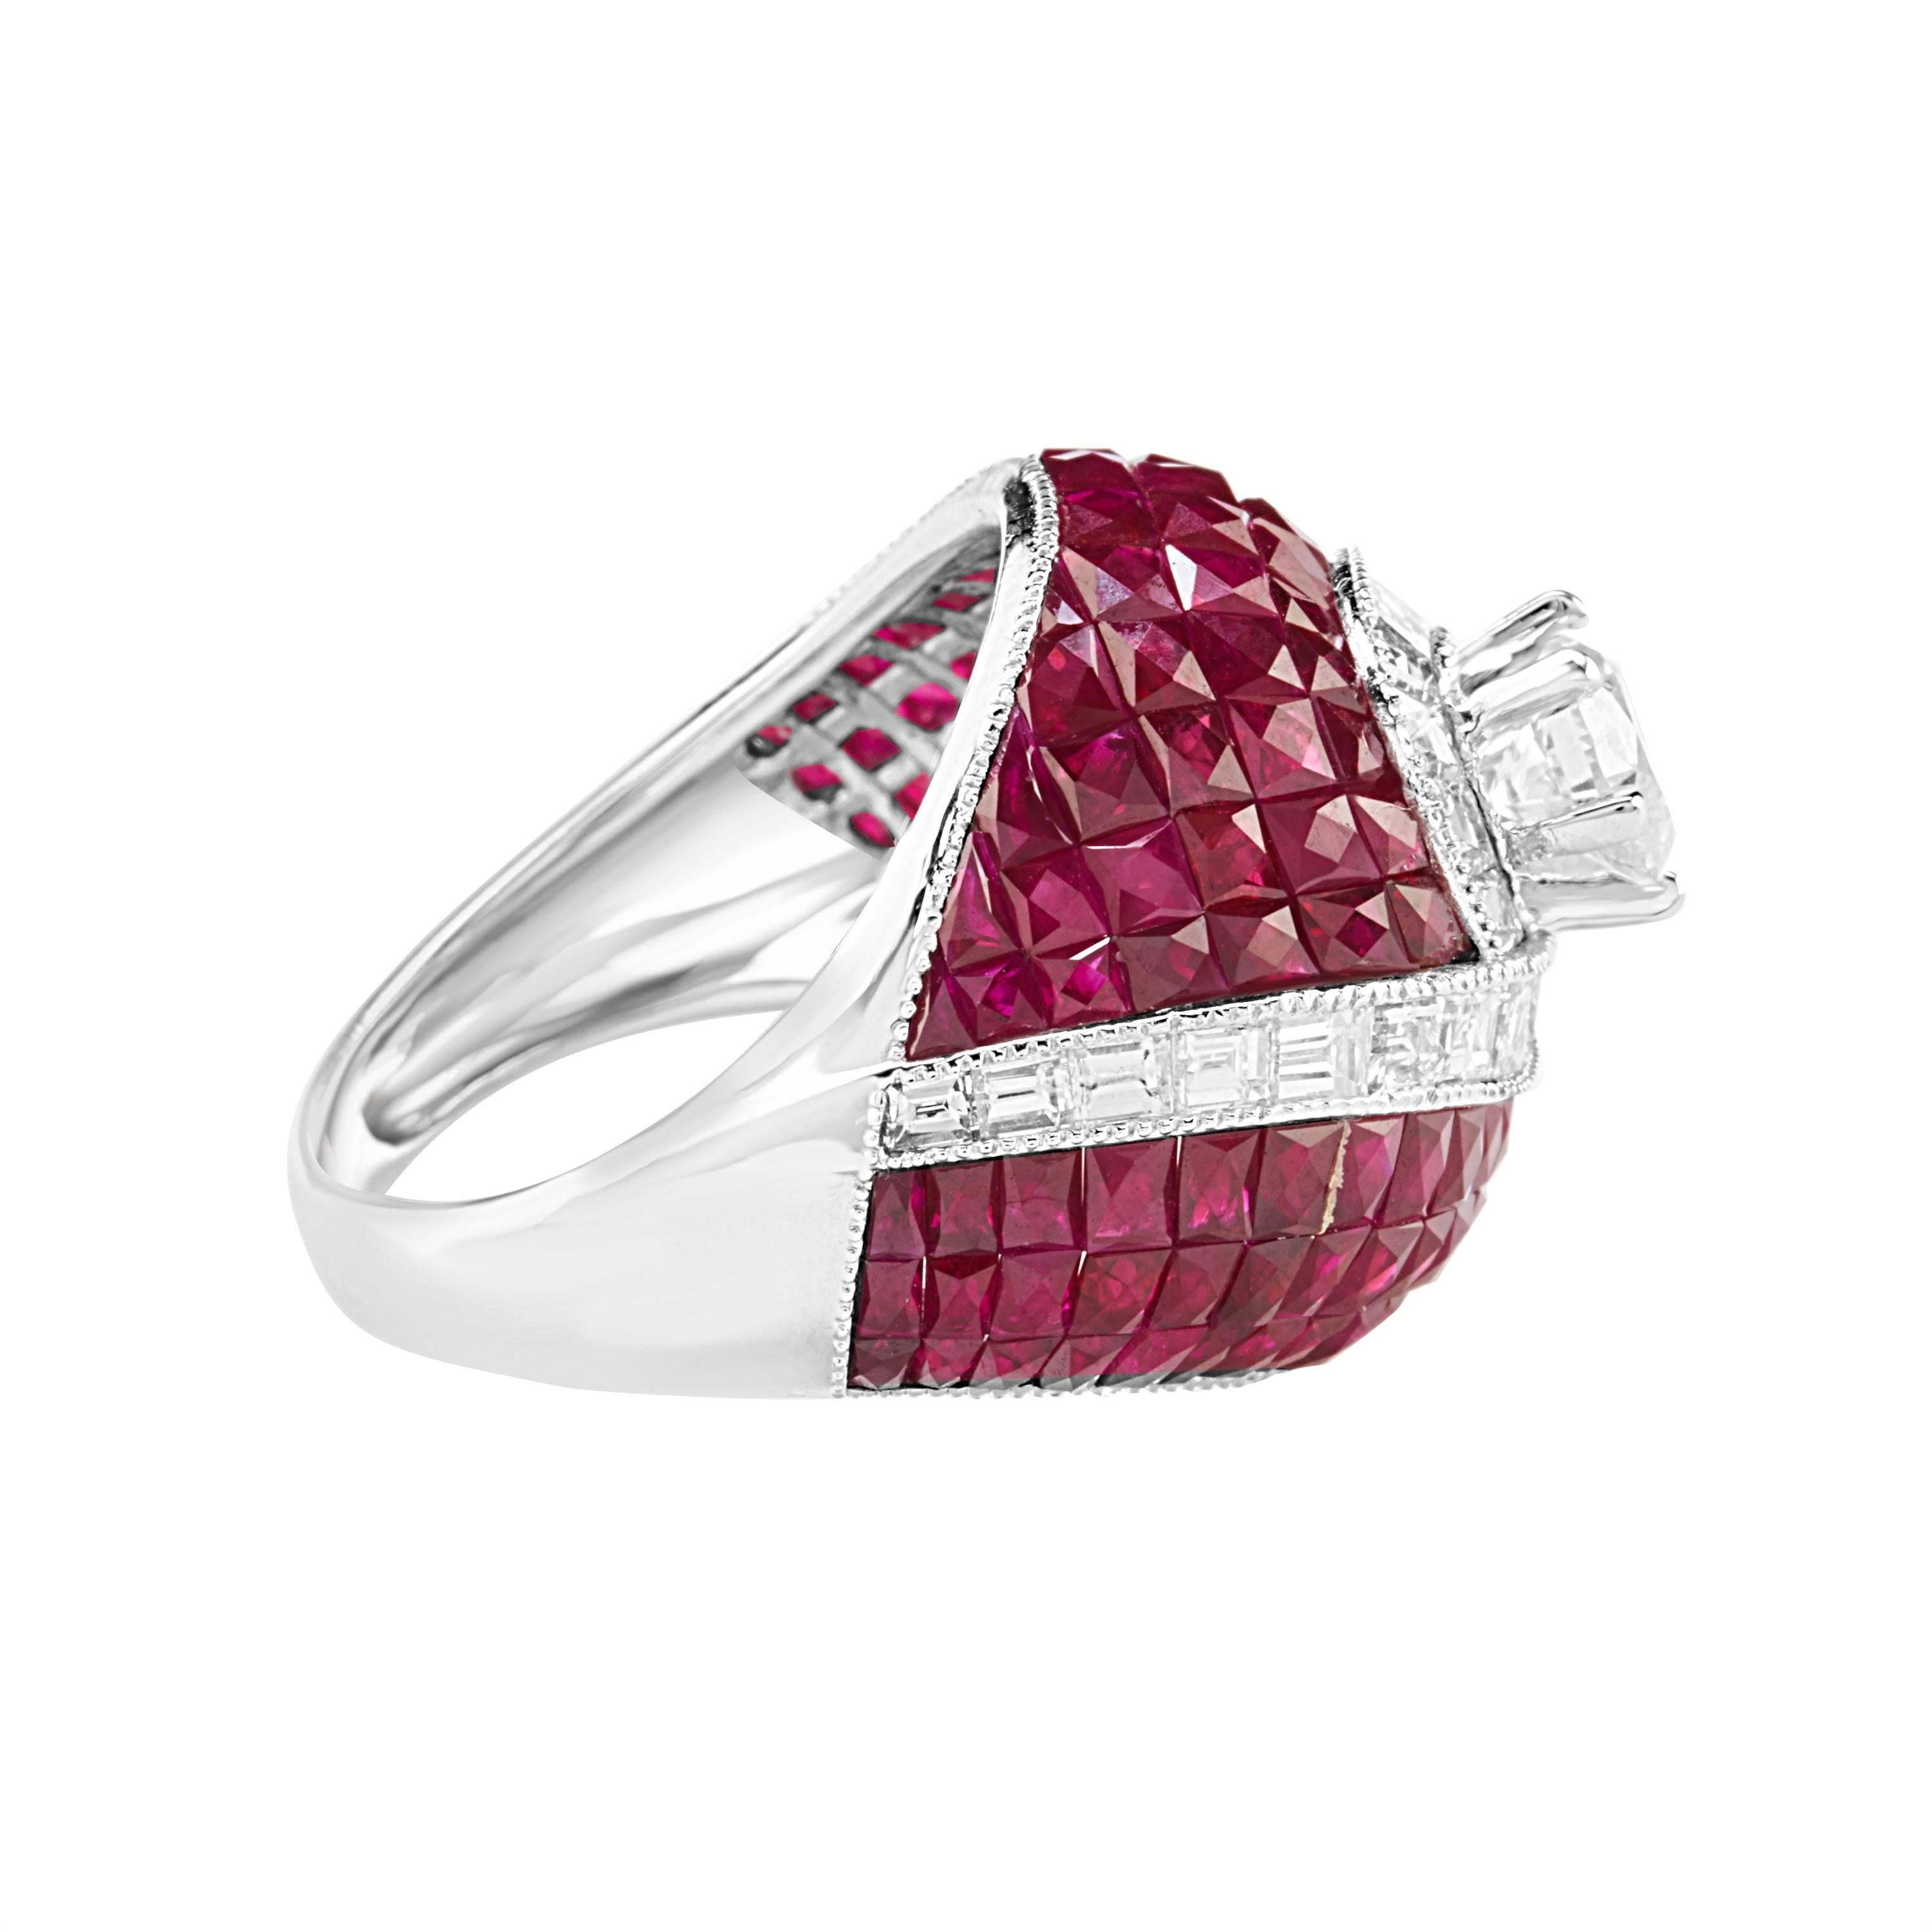 This ring does the talking for you! GIL Report
Featuring a Diamond dome centre surrounded by beautiful and perfectly French cut Rubies.
Each Diamond and Ruby were superbly made and perfectly cut to interlock into this amazing piece of fine art.
Ruby